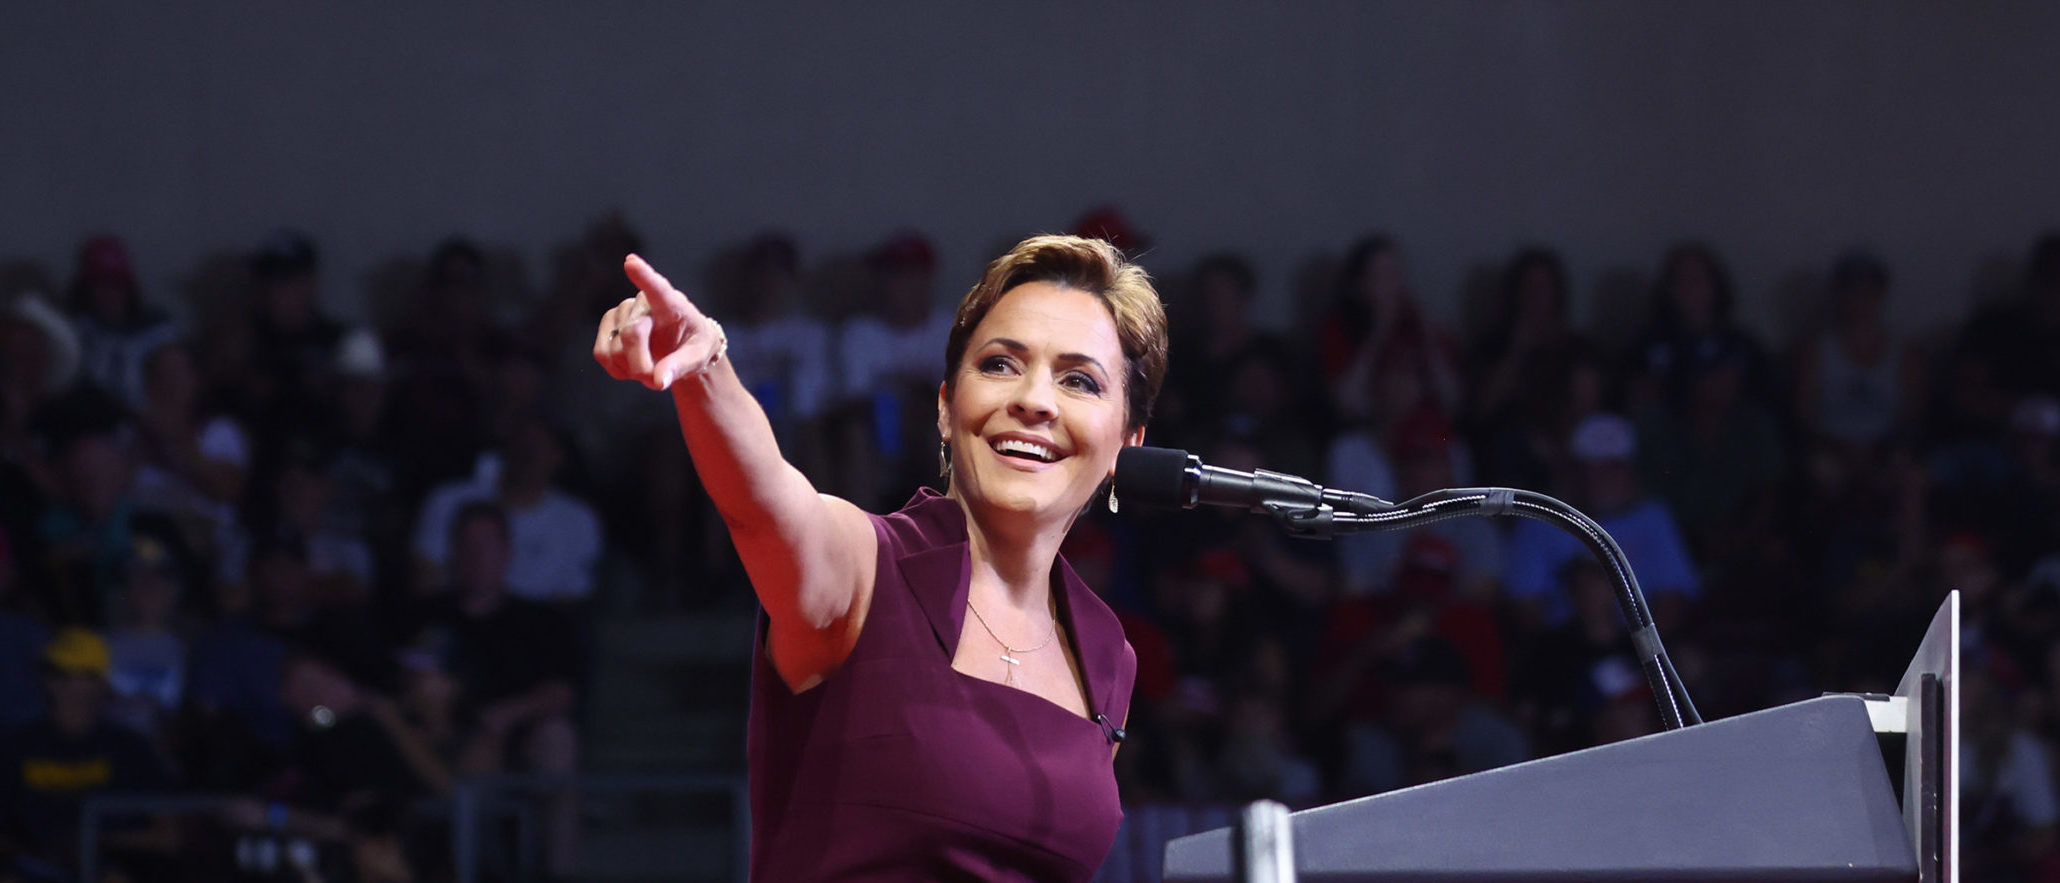 PRESCOTT VALLEY, ARIZONA - JULY 22: Republican candidate for governor Kari Lake speaks at a 'Save America' rally by former President Donald Trump in support of Arizona GOP candidates on July 22, 2022 in Prescott Valley, Arizona. Arizona's primary election will take place August 2. (Photo by Mario Tama/Getty Images)